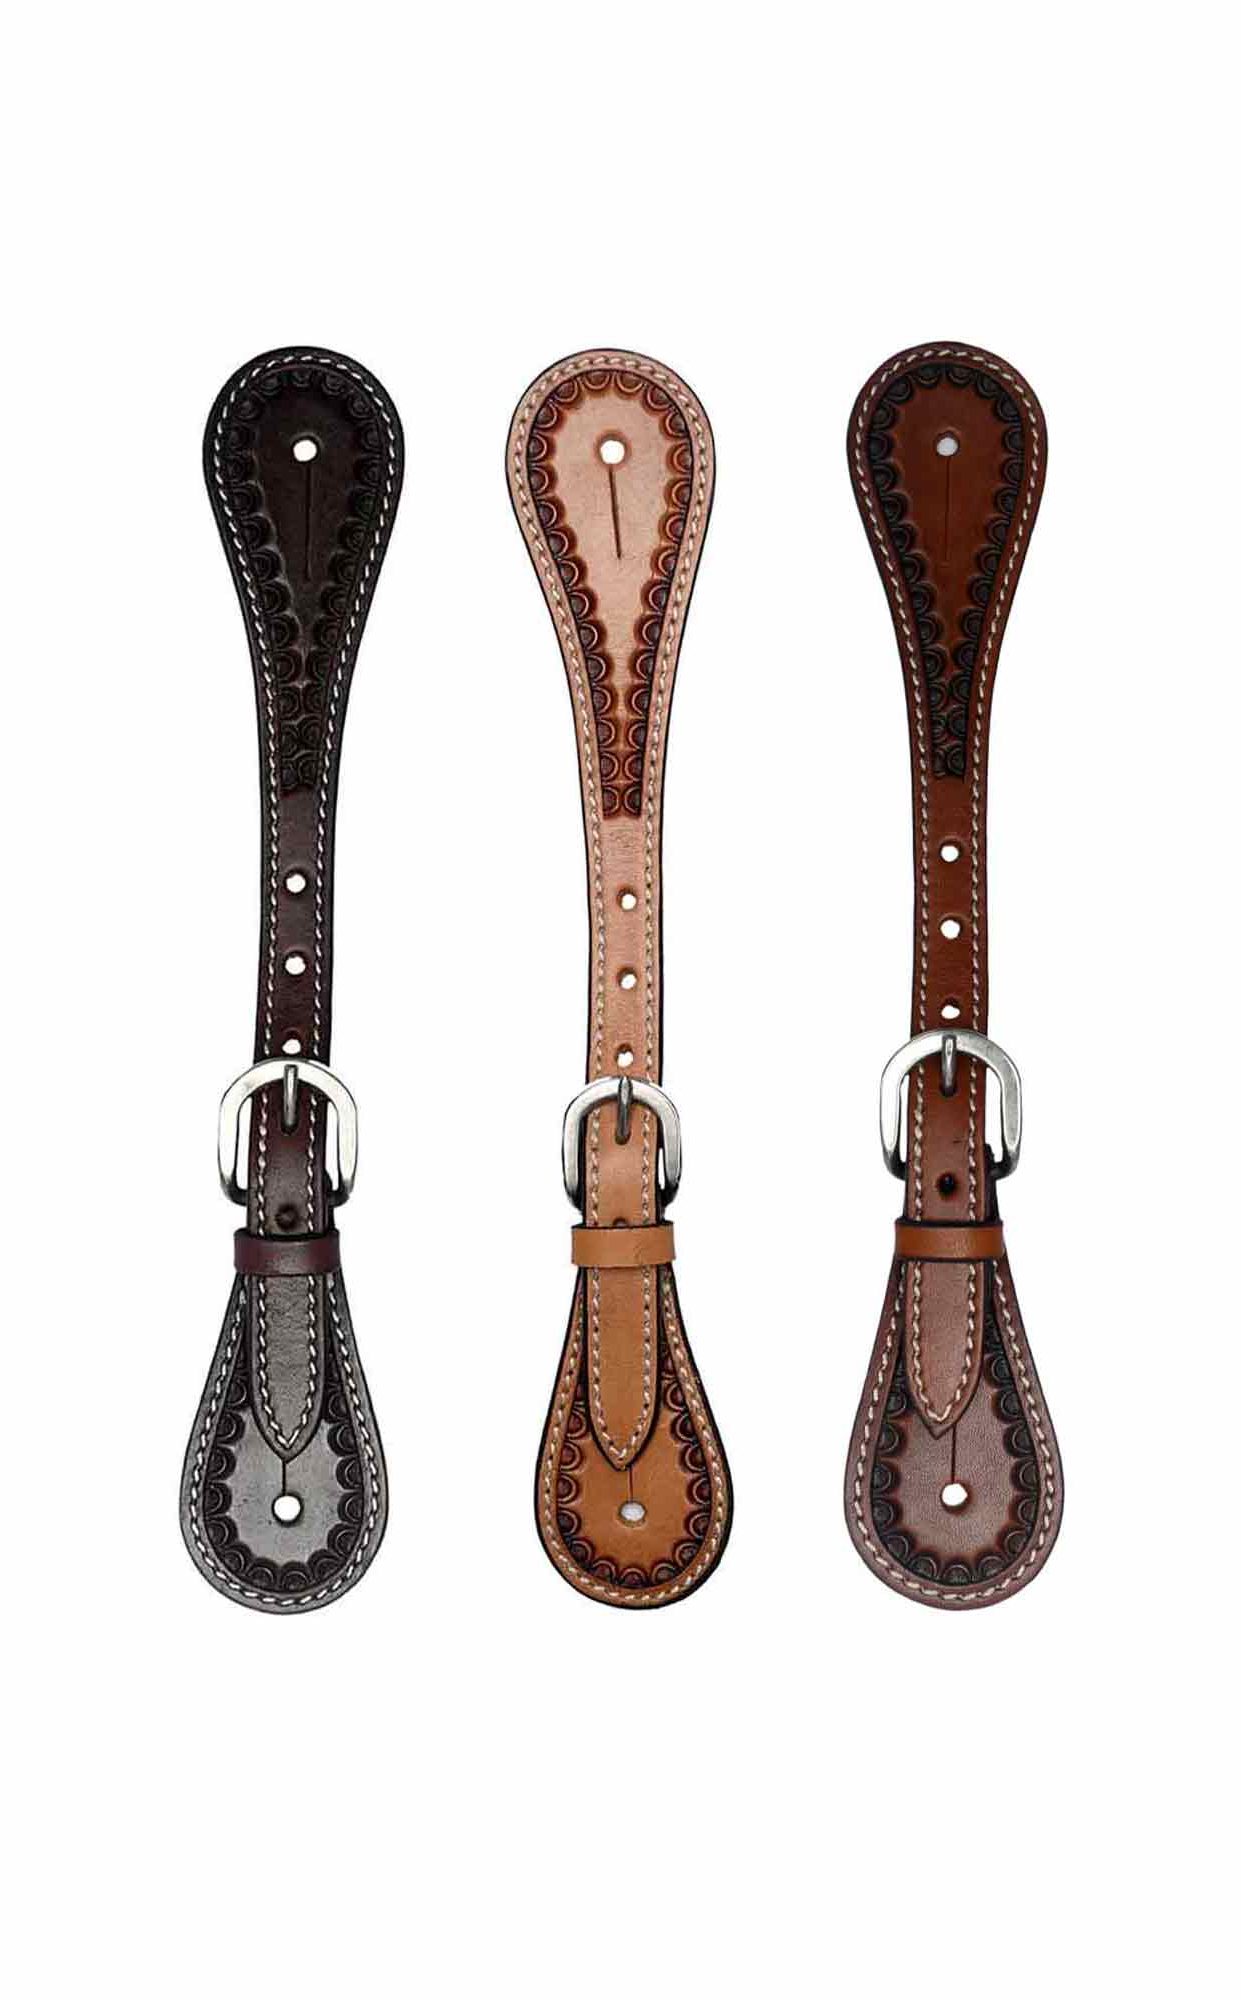 Black Hoof Border Tooled Leather Spur Straps for Horse Riders | Western  Men, Women, Adjustable Single Ply Spur Straps | Equestrian Accessories